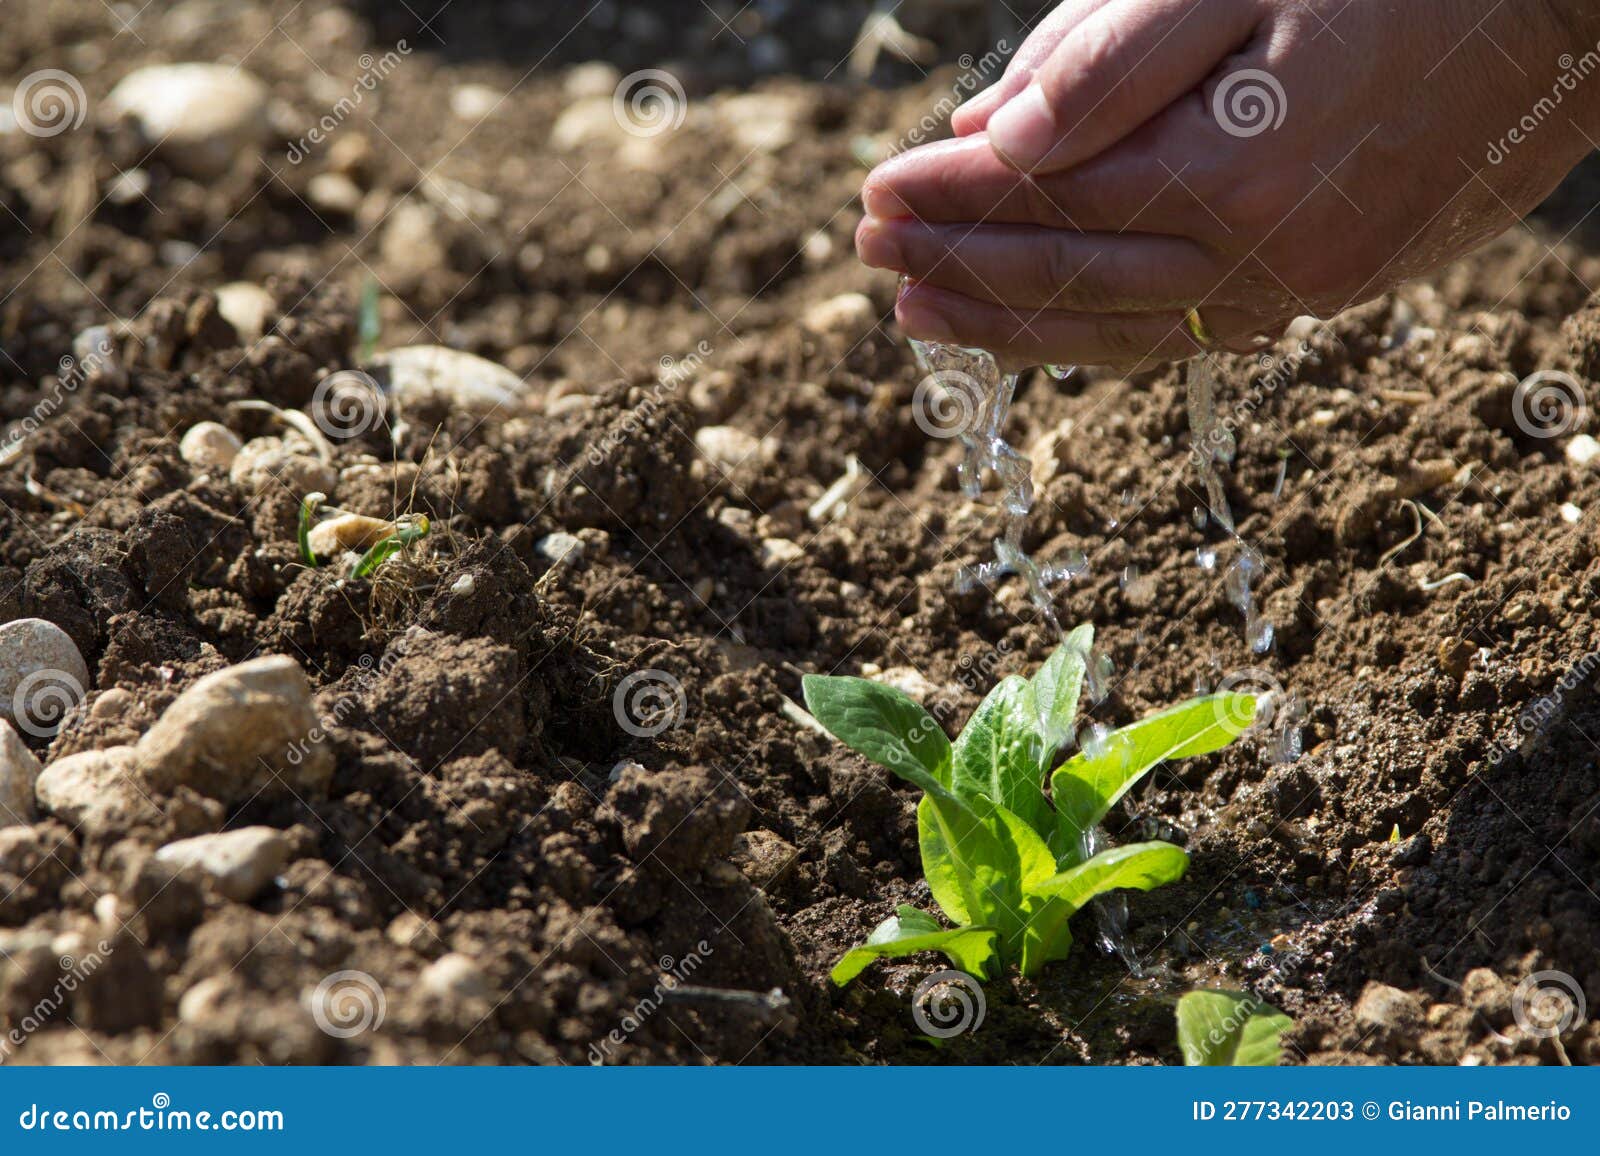 image of a man's hands pouring water on a small seedling.